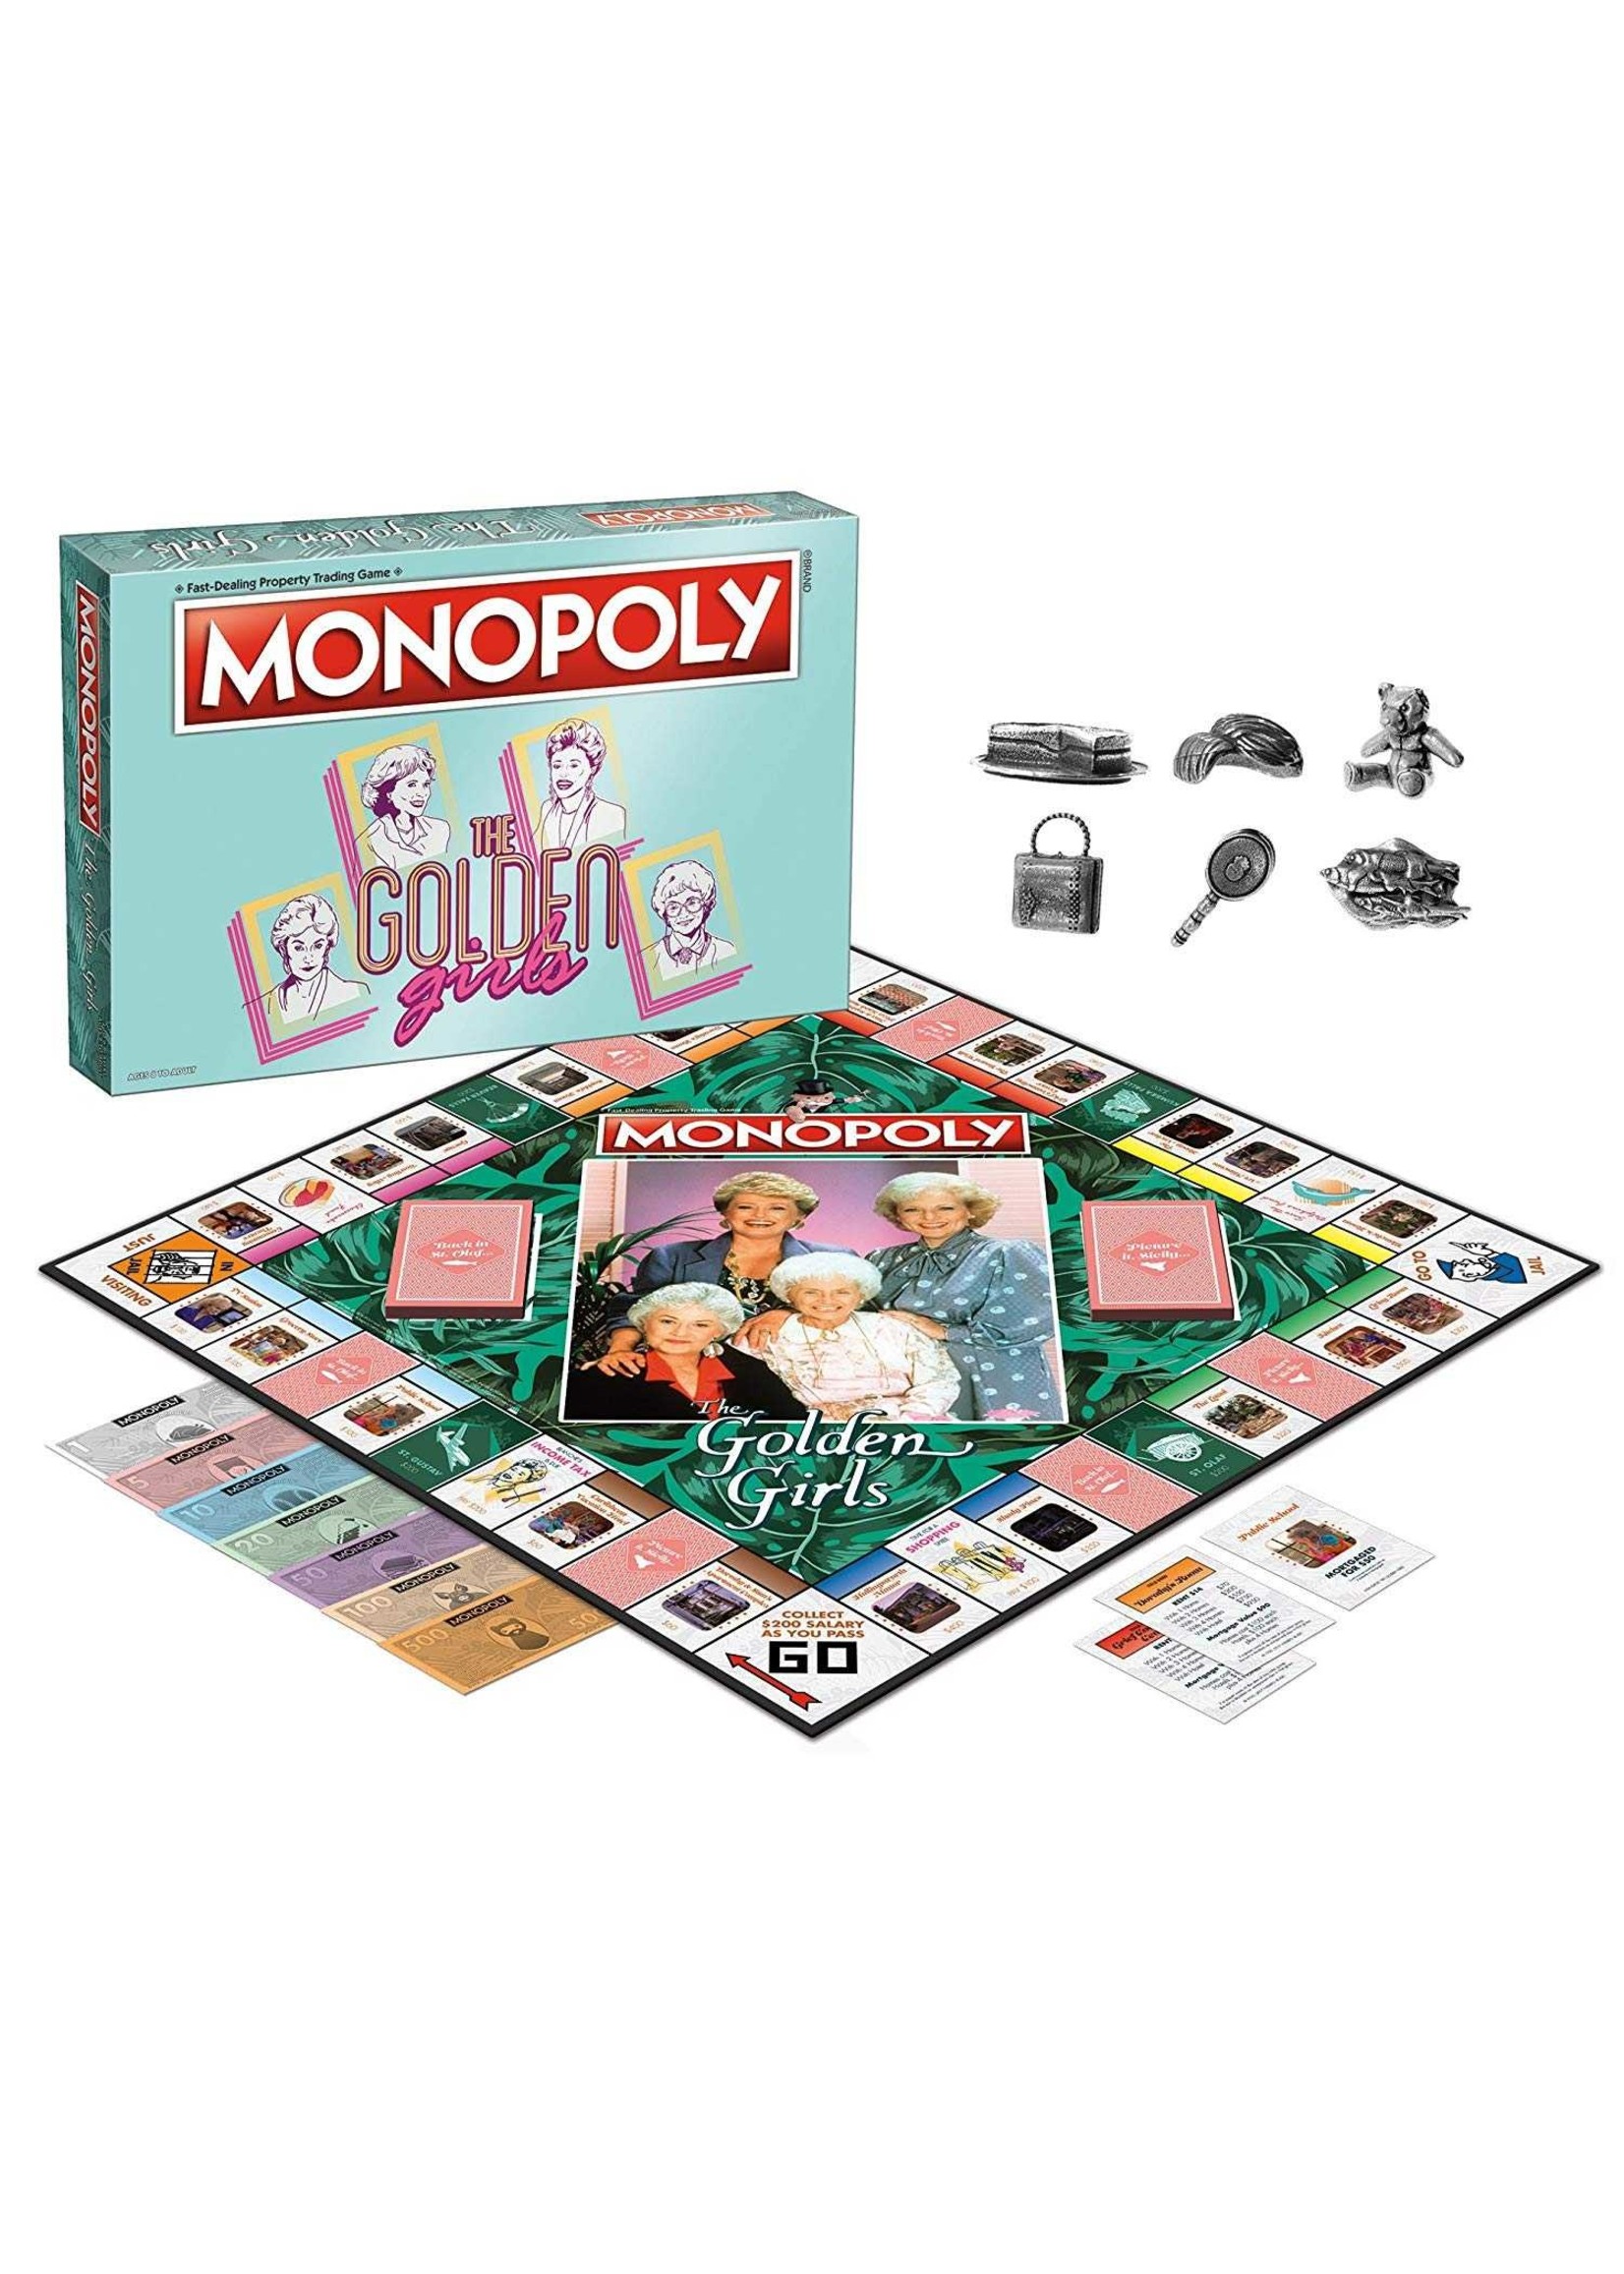 Usaopoly Monopoly: Golden Girls